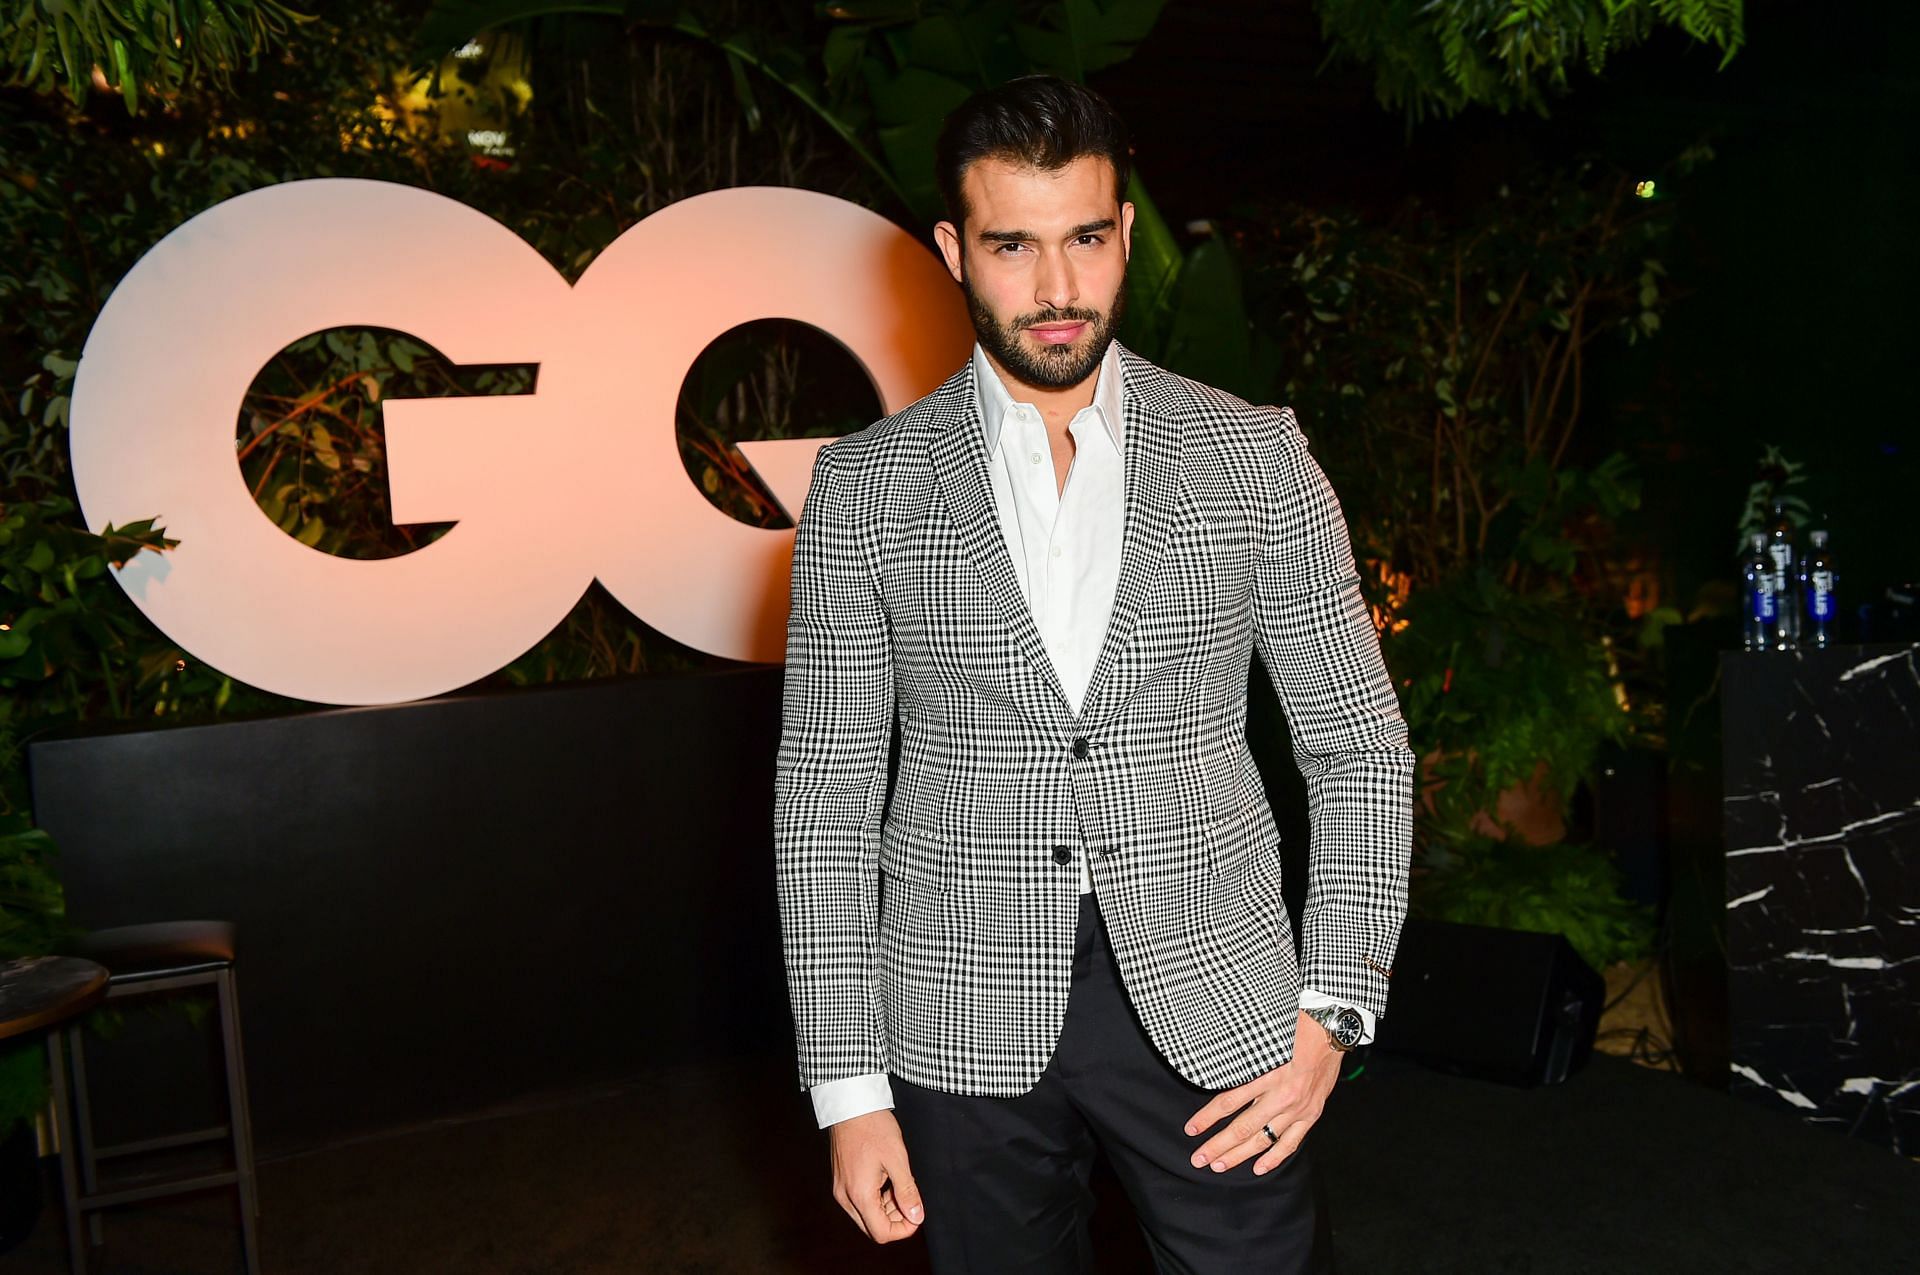 Sam at the GQ Men of the Year Party 2022 at The West Hollywood EDITION - Inside (Image via Getty Images)